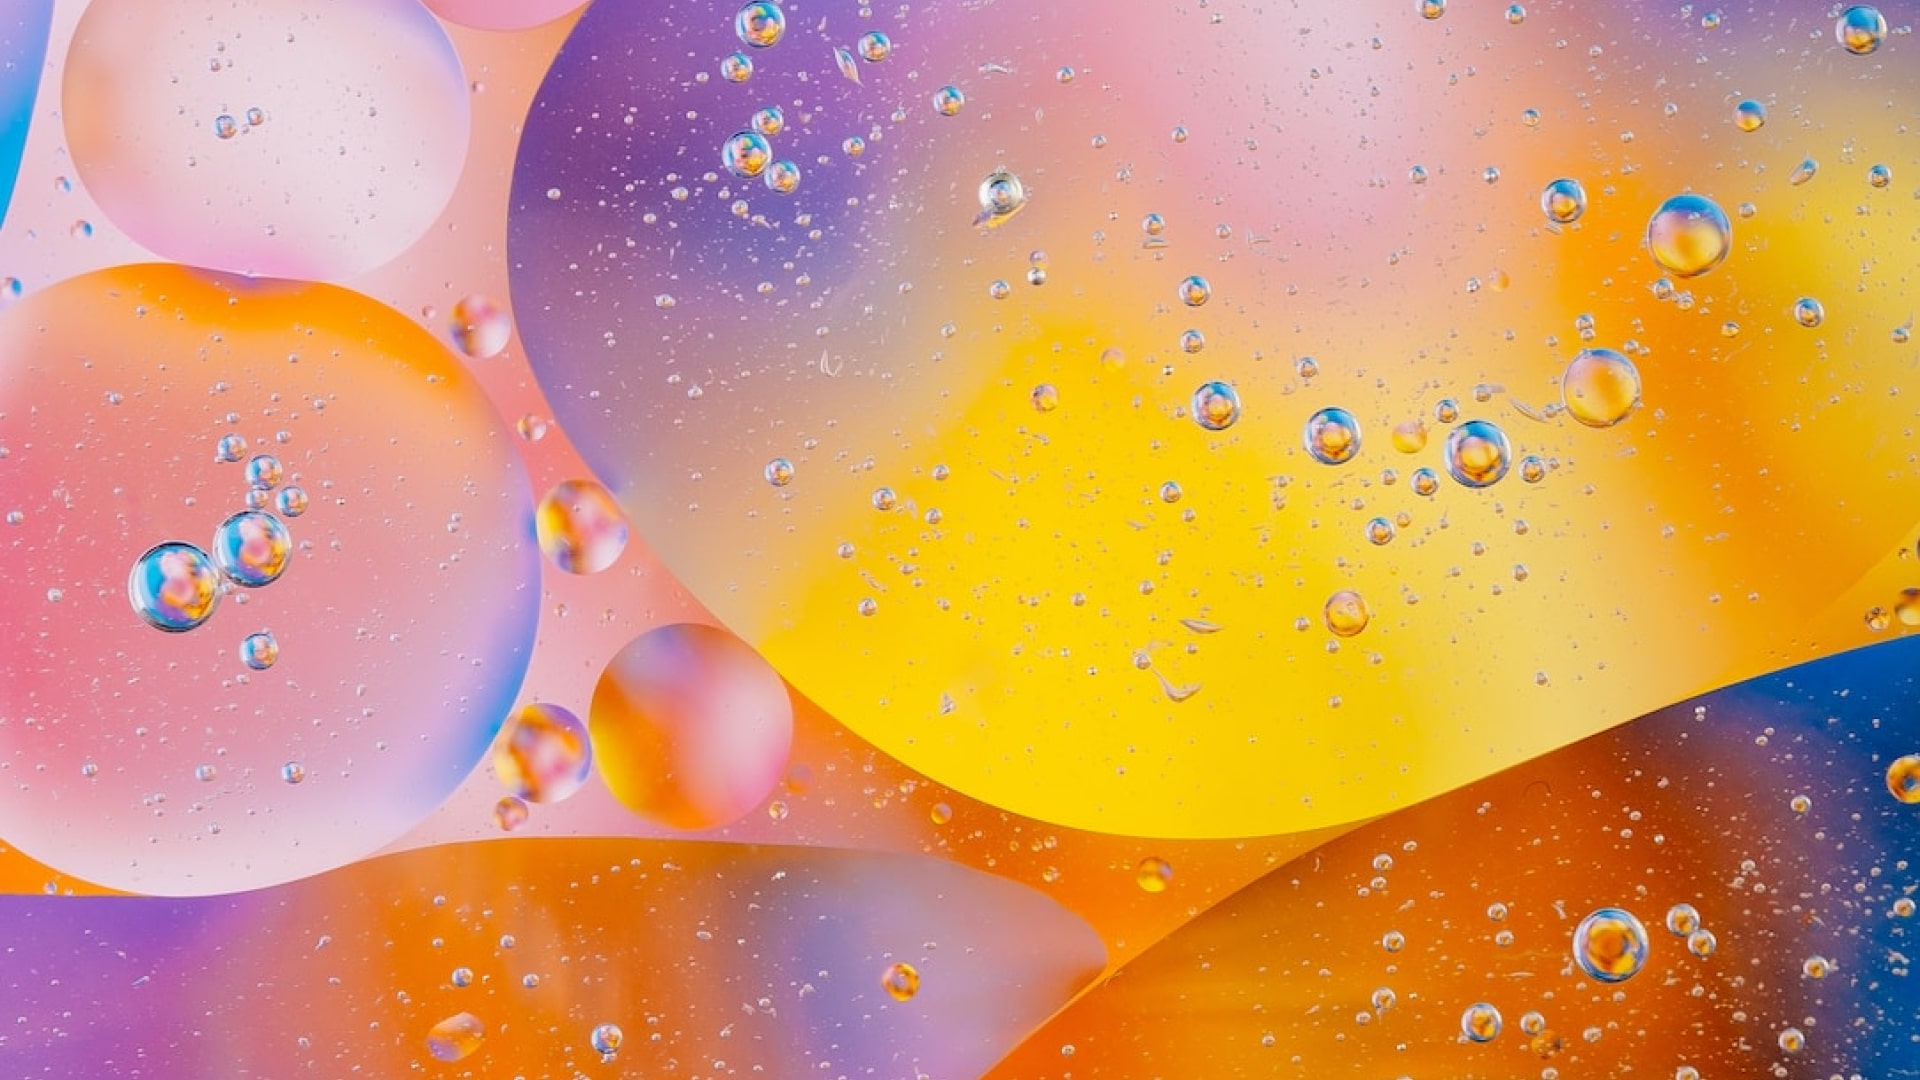 abstract image of bubbles